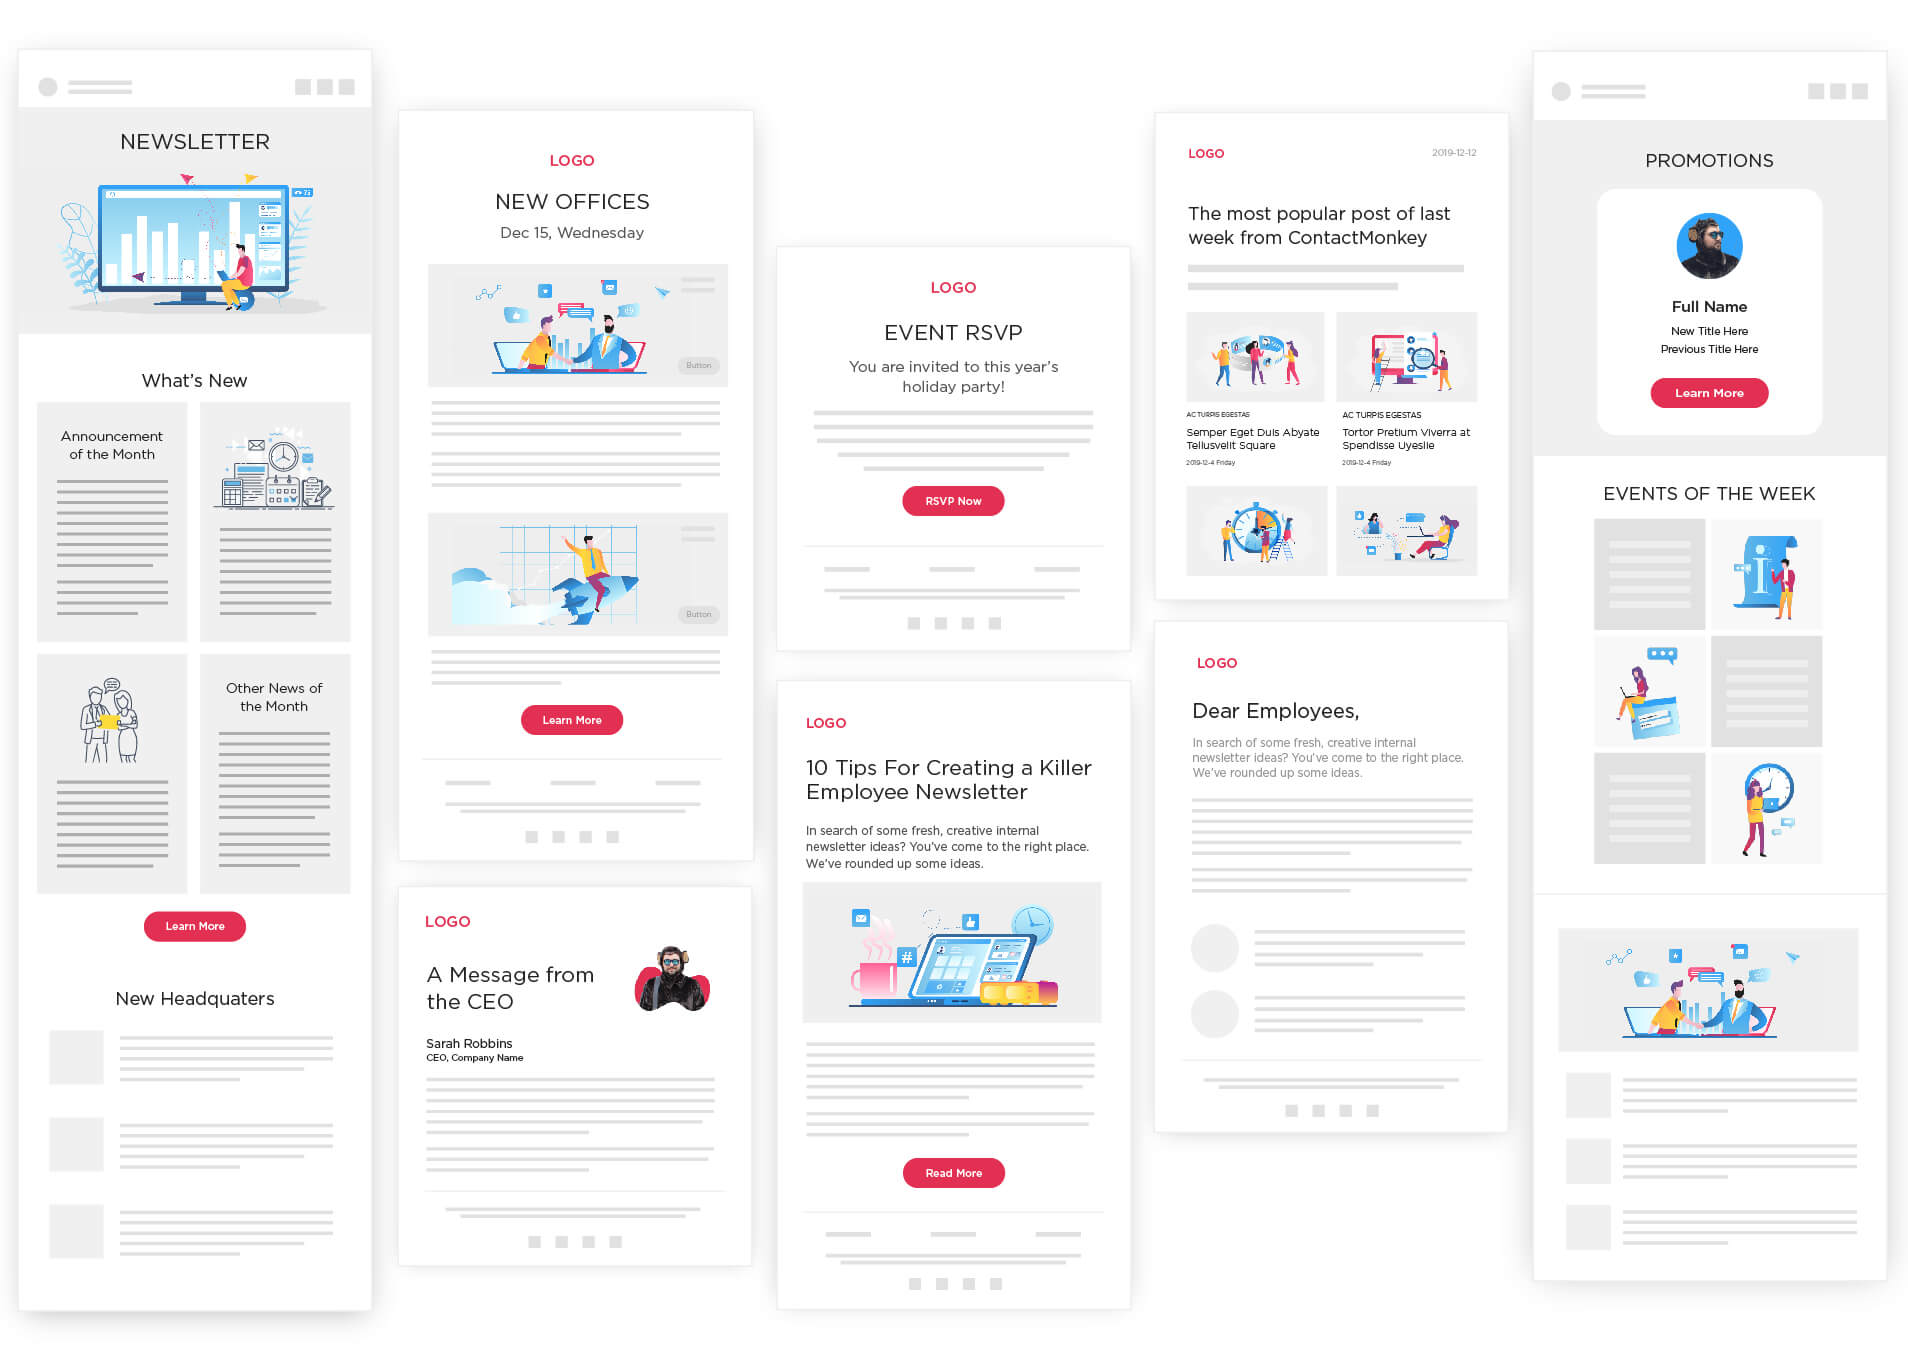 Image of different employee newsletter templates found in ContactMonkey's email template library.